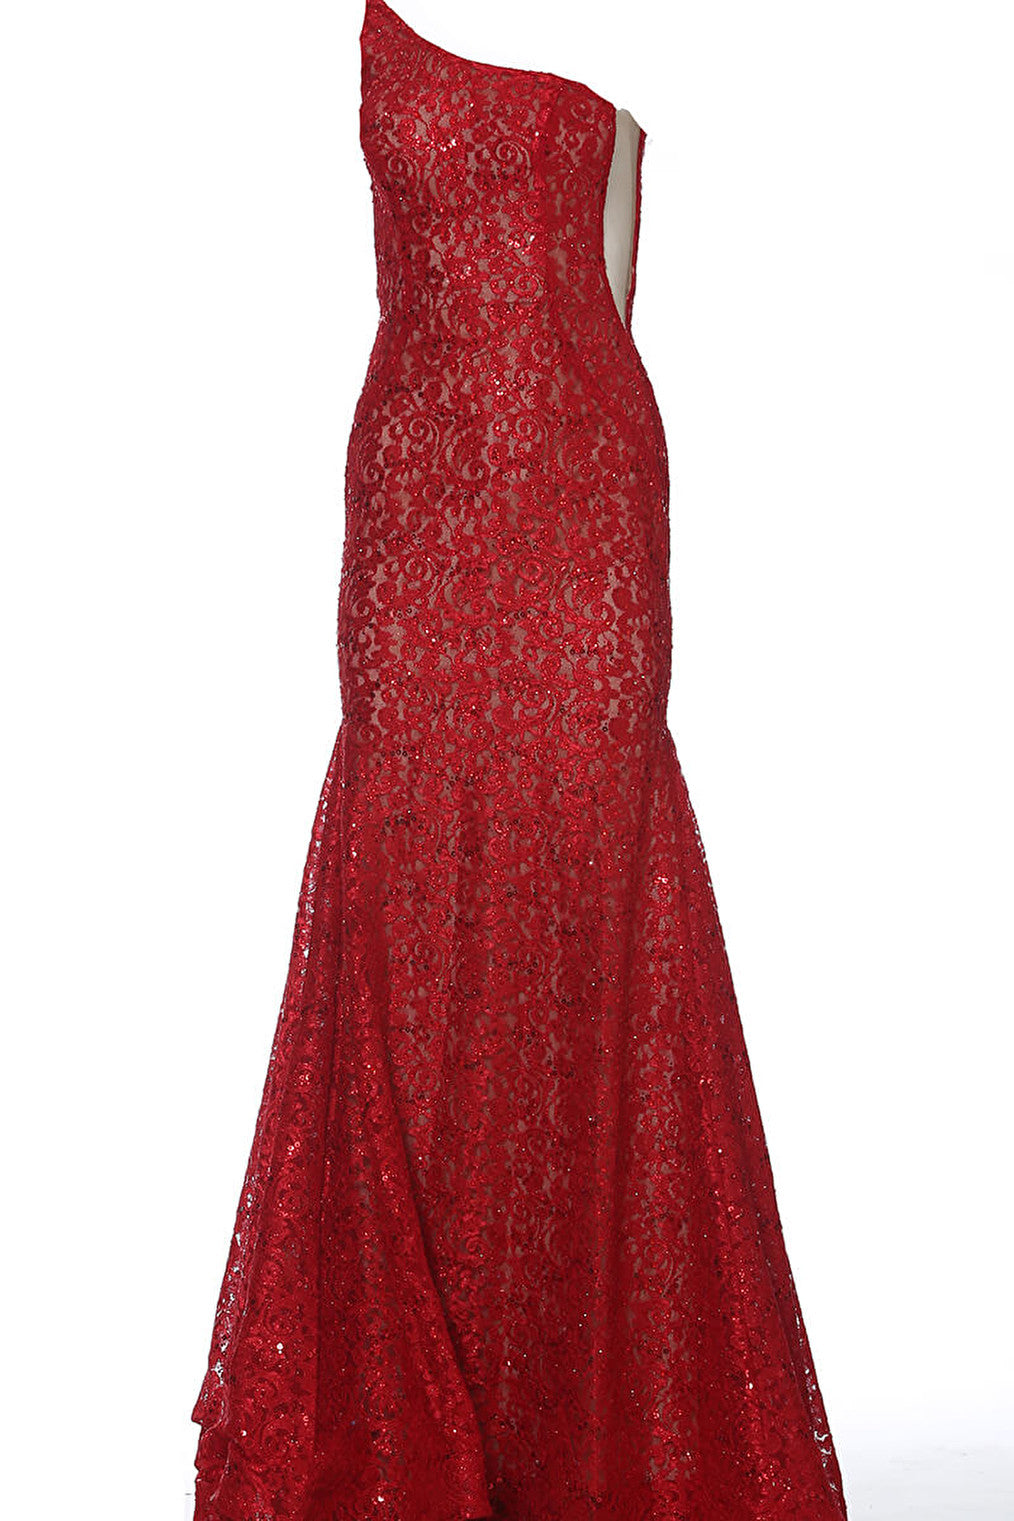 red floor length lace prom dress 3927